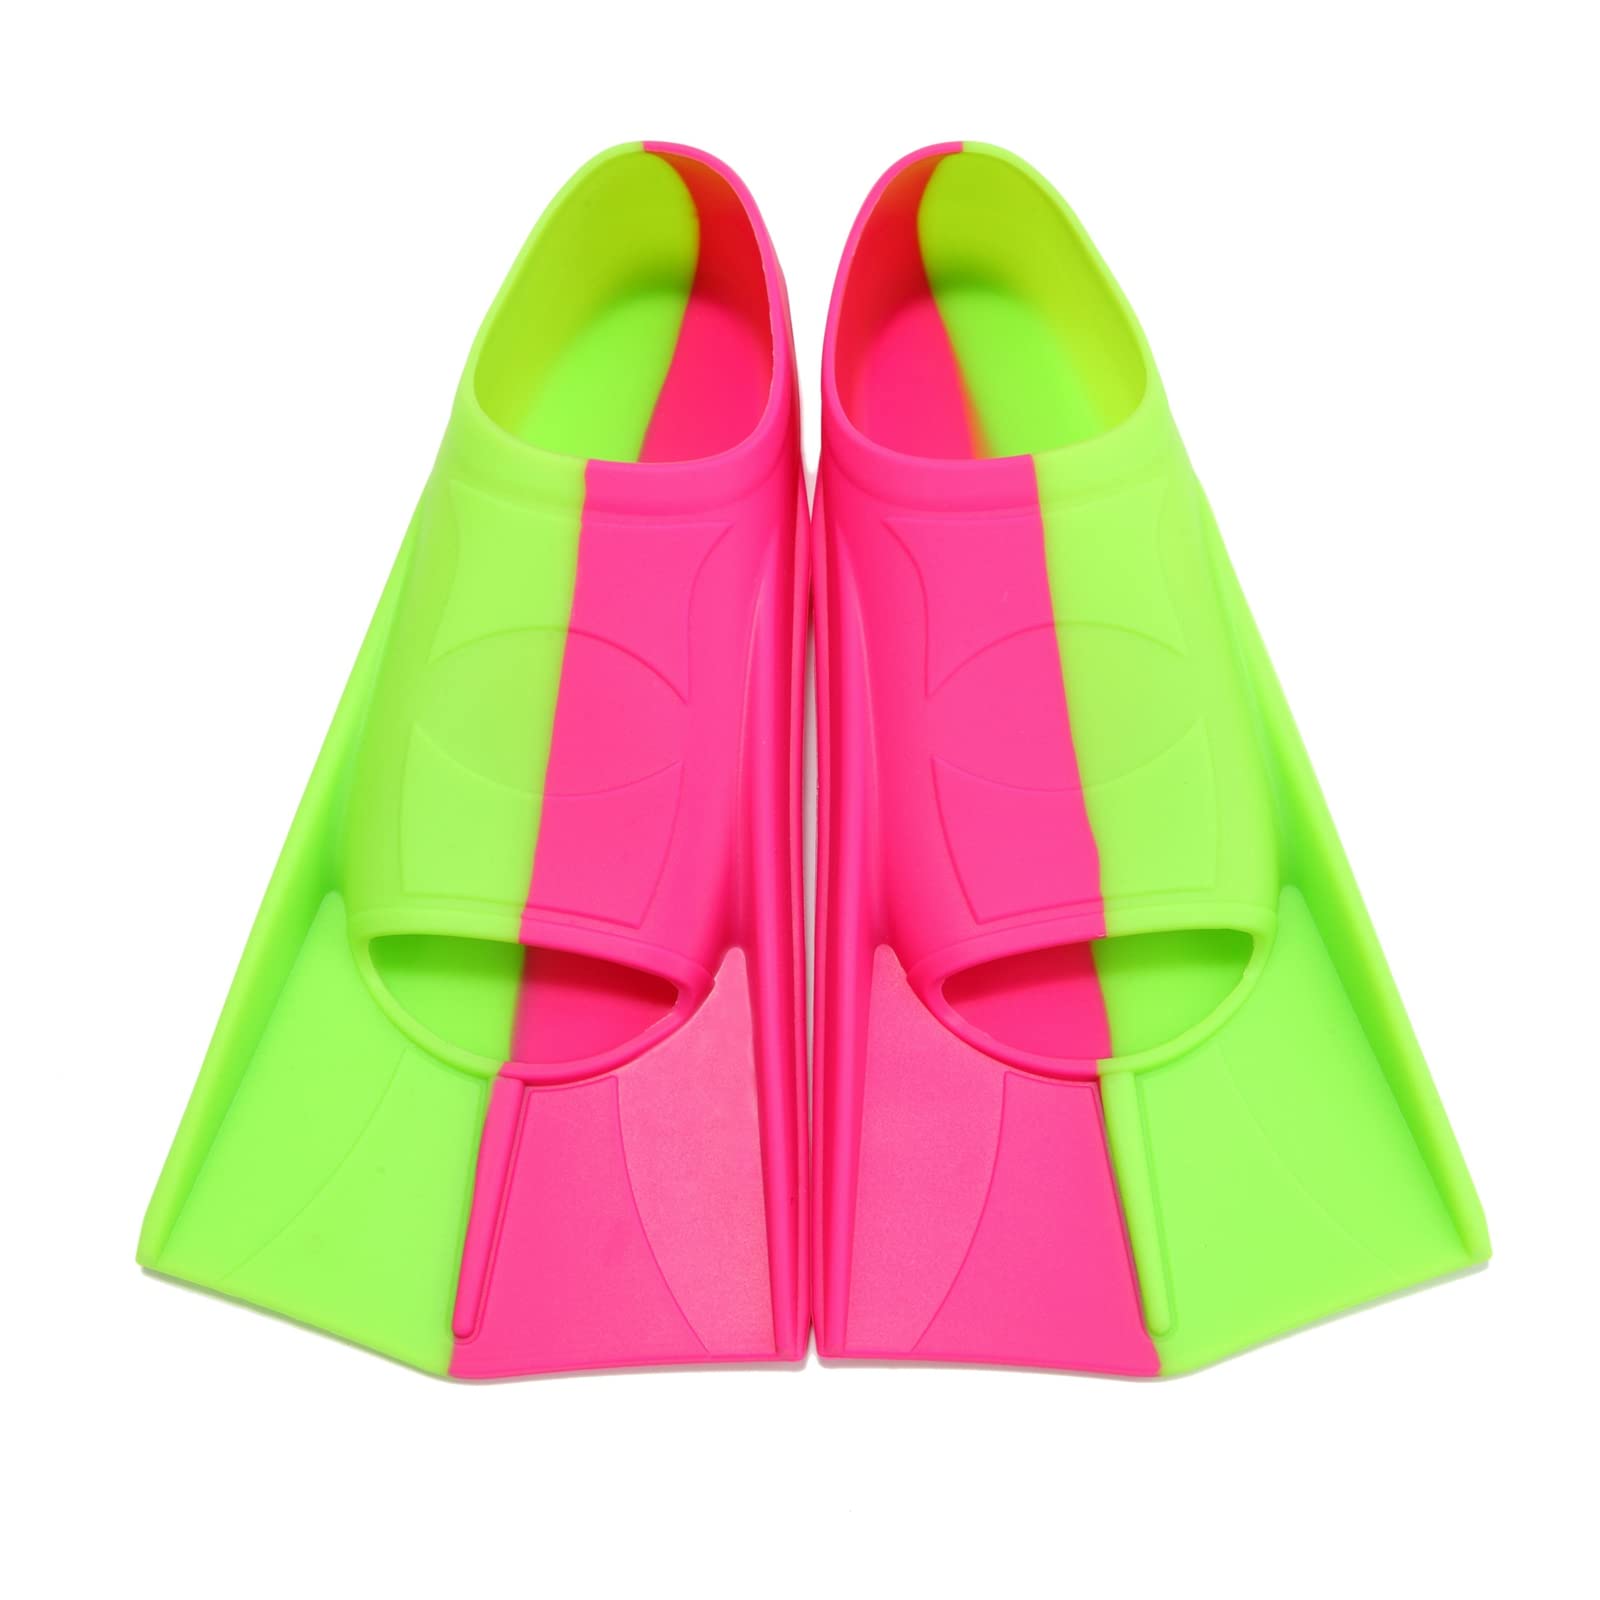 Foyinbet Kids Swim Fins,Short Youth Fins Swimming Flippers For Lap Swimming And Training For Child Girls Boys Teens Adults Women